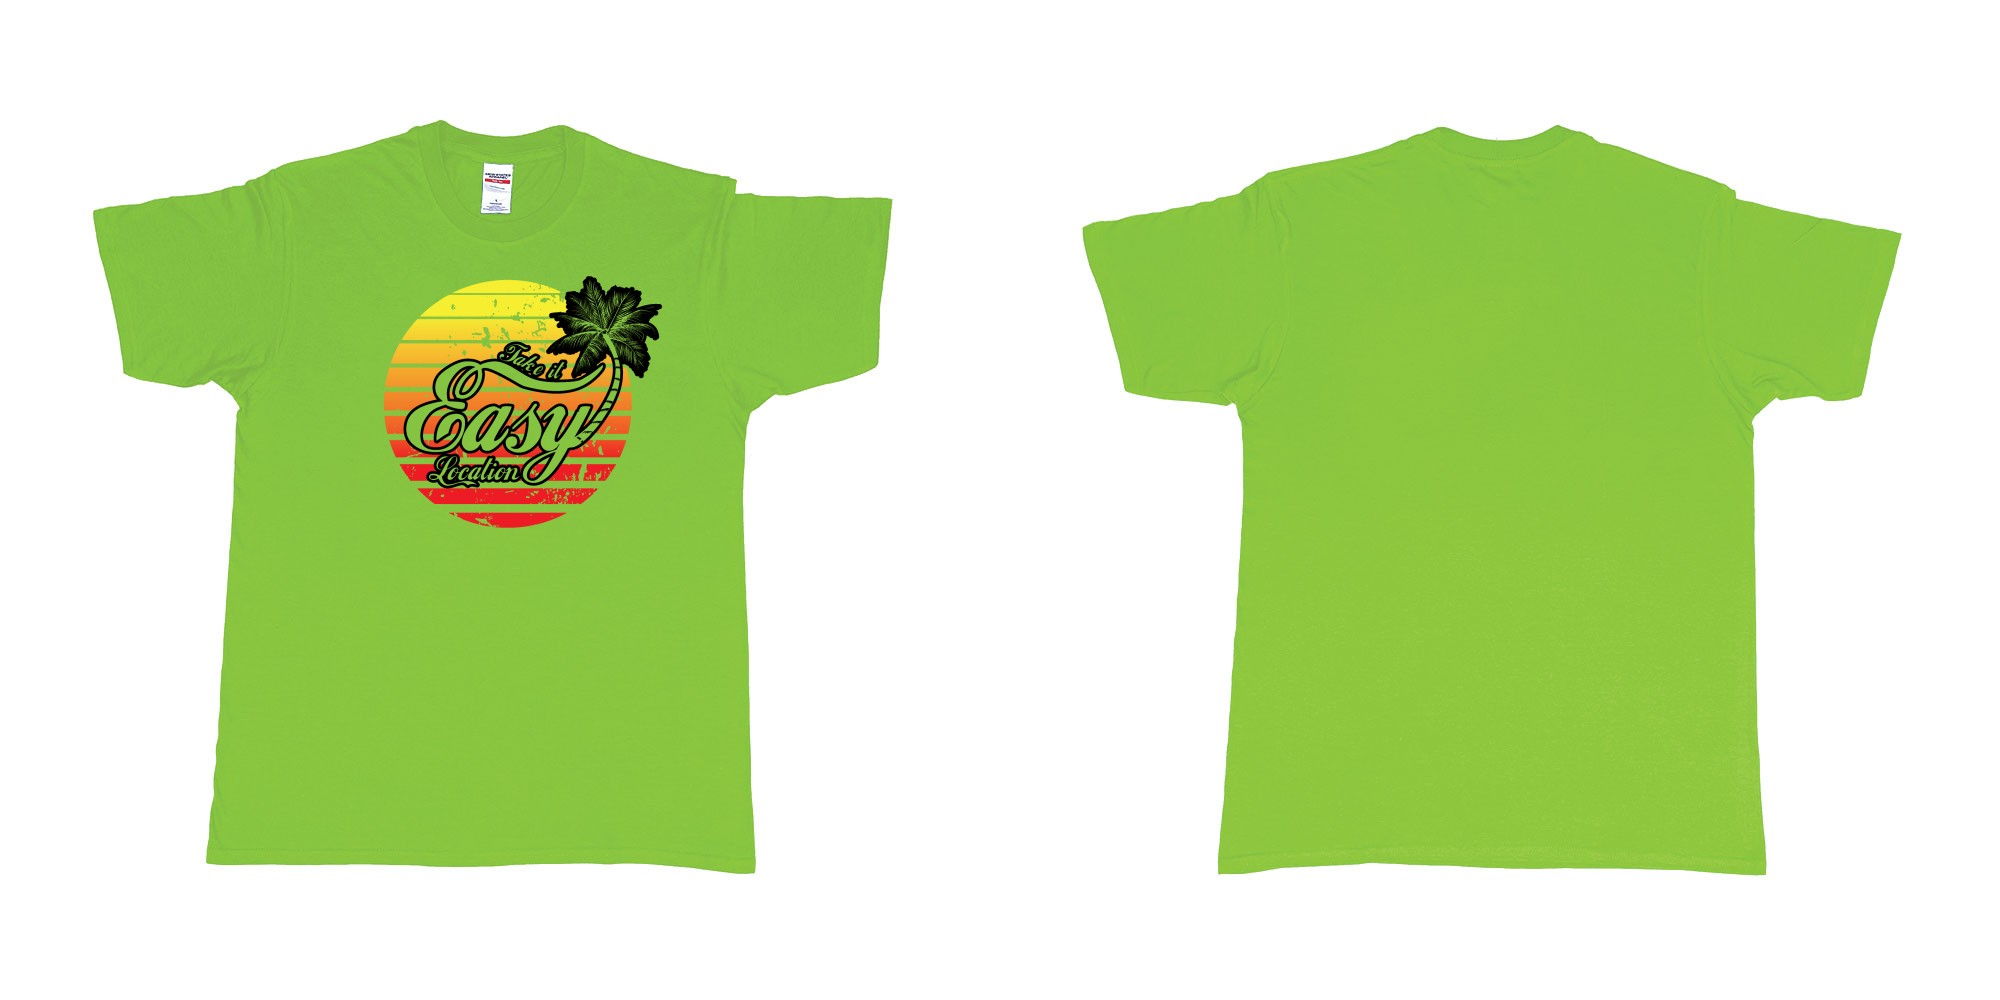 Custom tshirt design take is easy own location easy tee bali custom text printing in fabric color lime choice your own text made in Bali by The Pirate Way